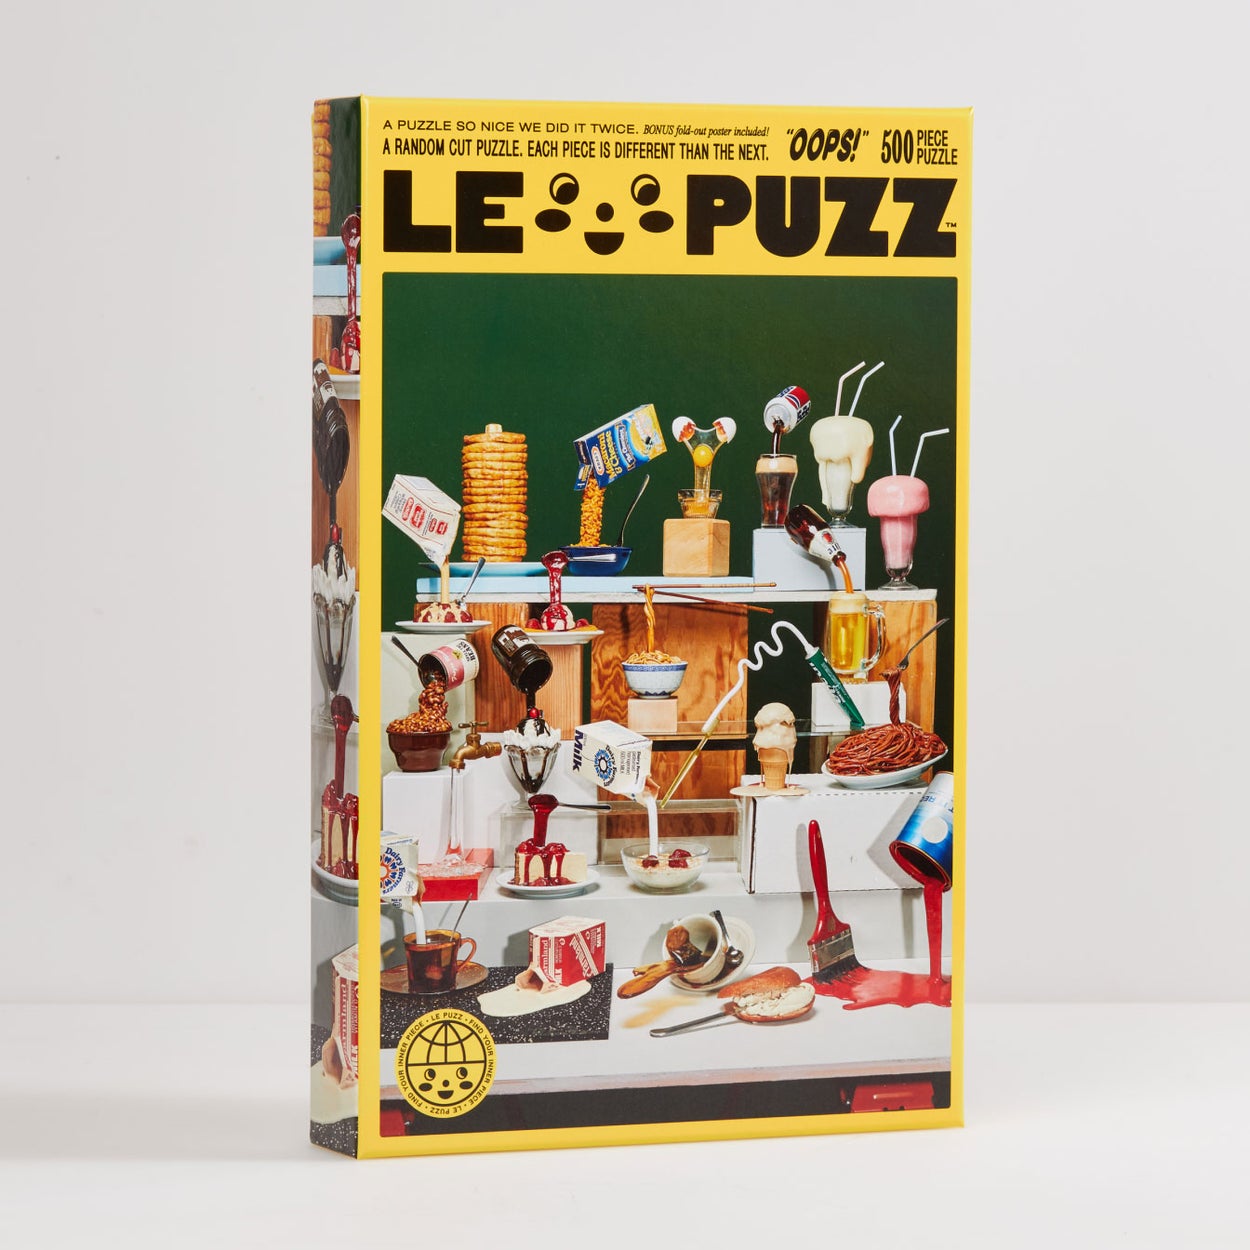 Puzzle Oops! - Le Puzz